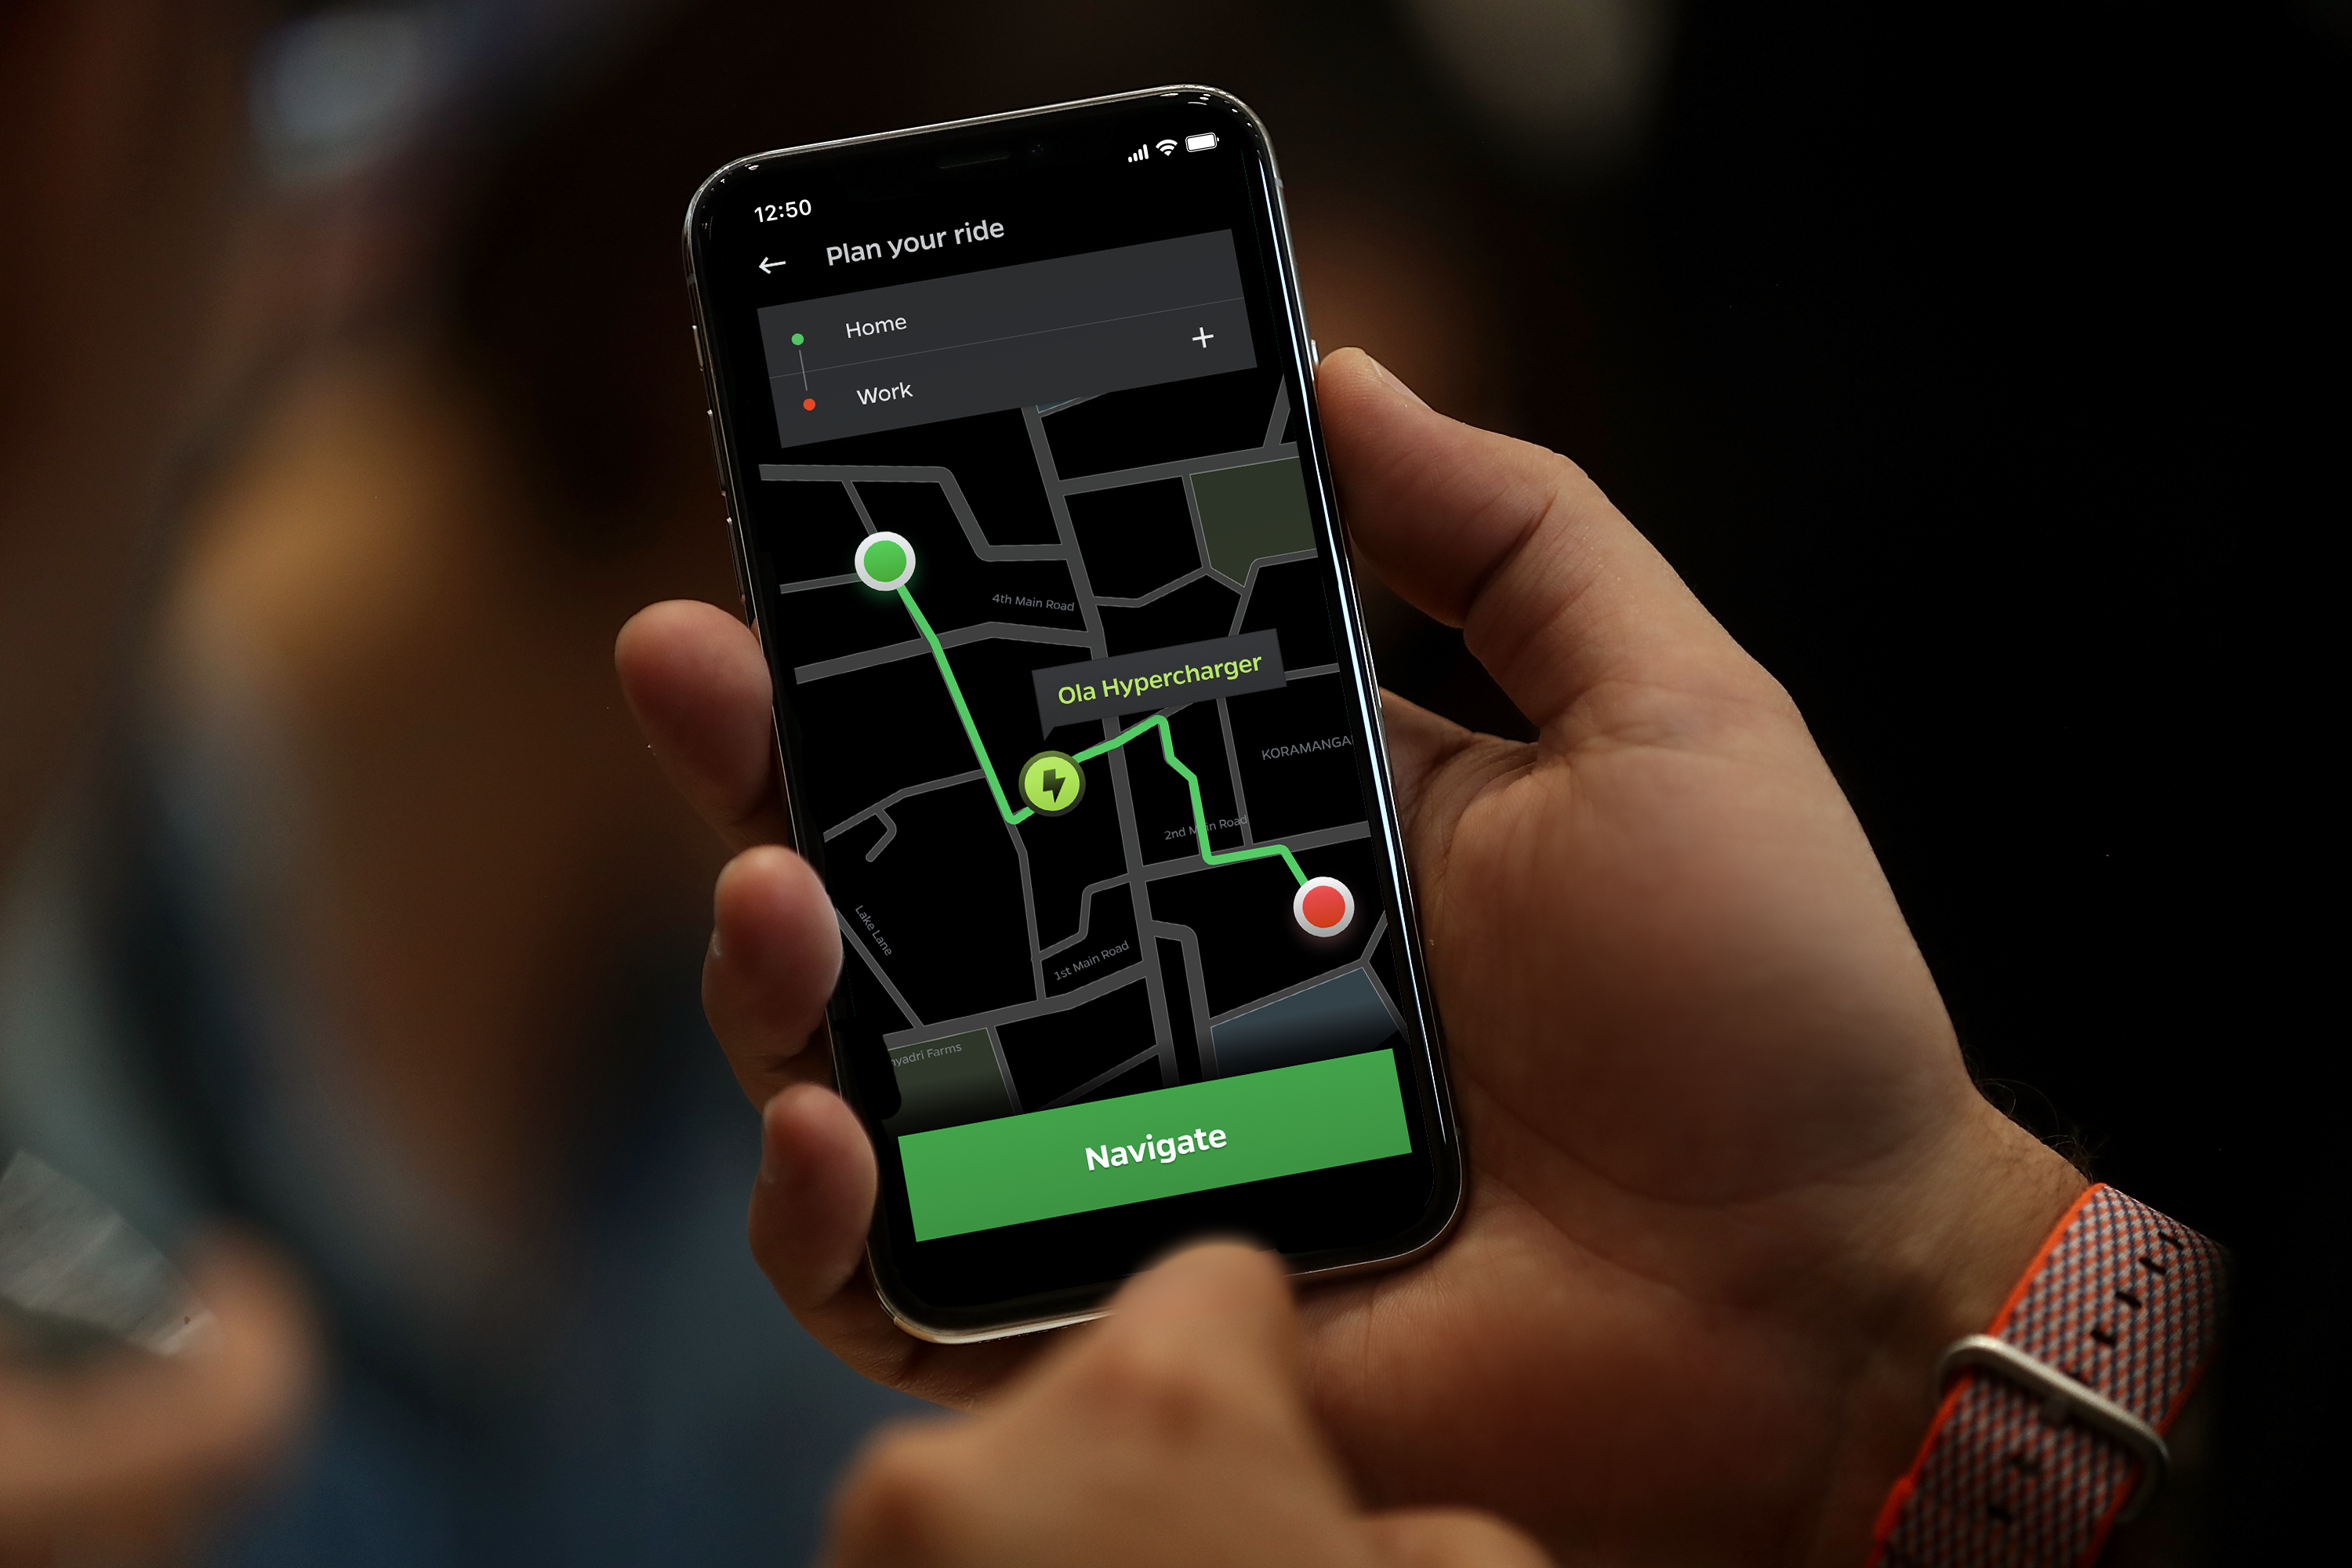 Ola Hypercharger Network: Navigation Suggestion to locate hypercharger